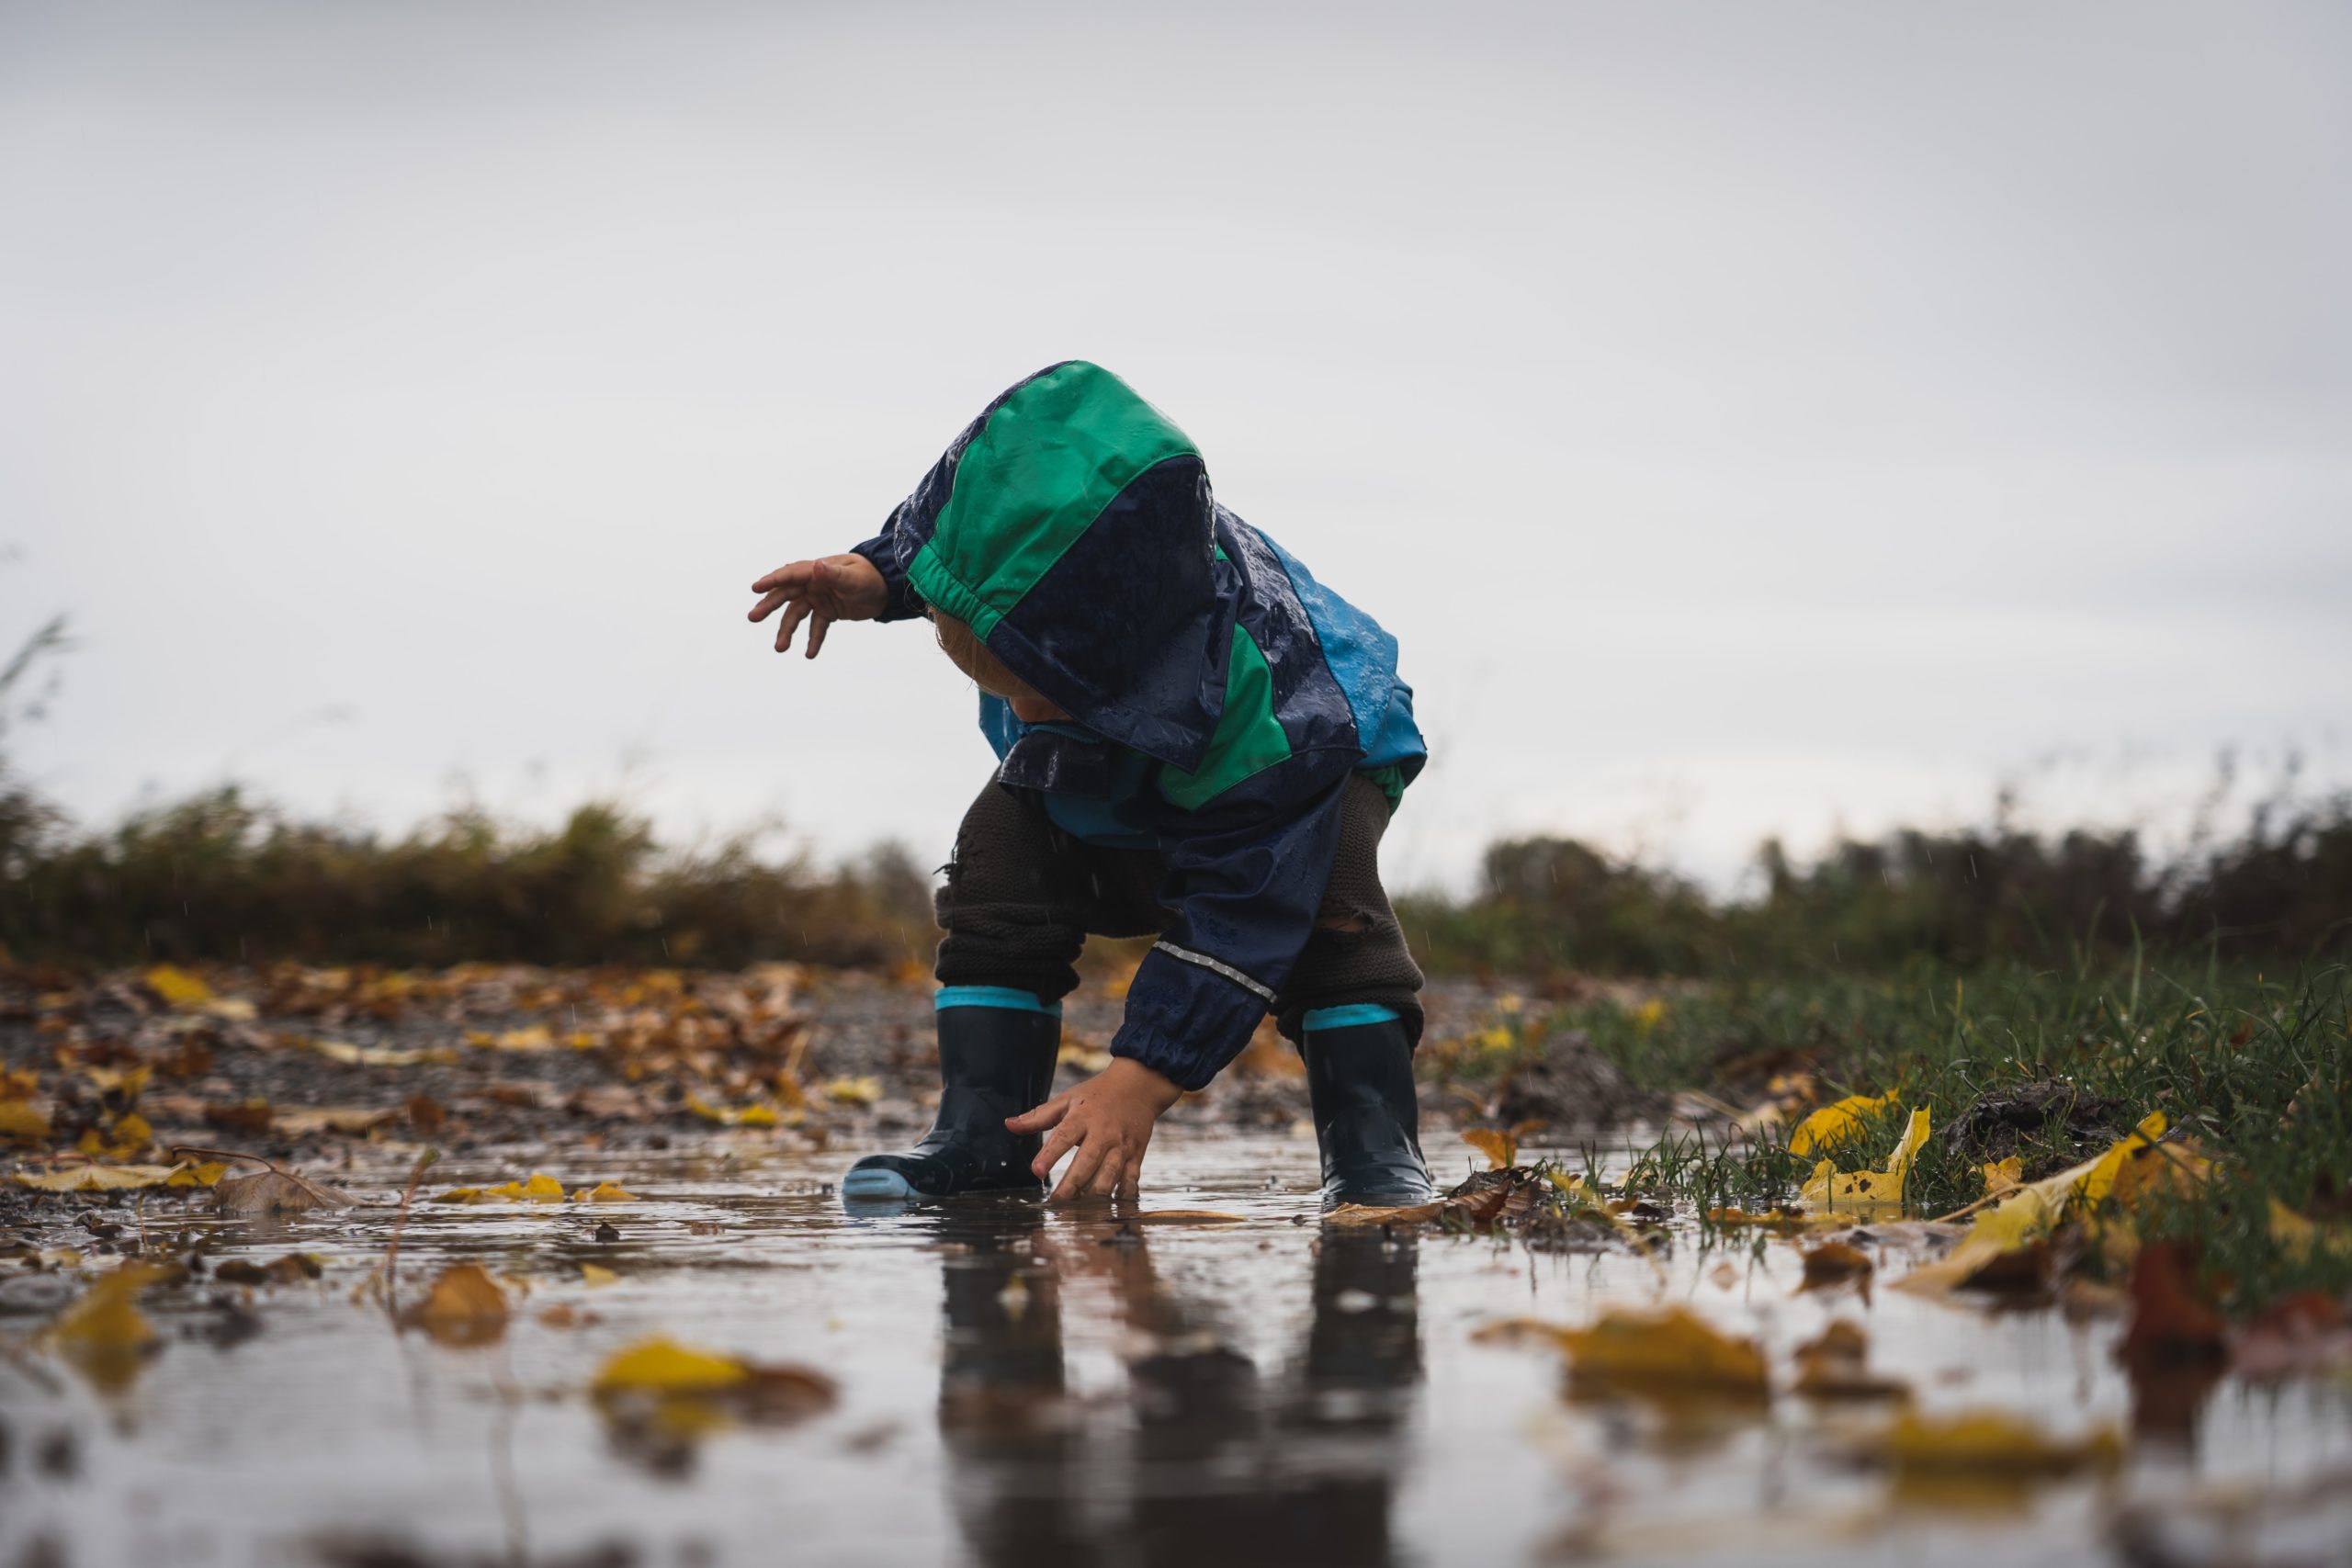 Toddler in a rain jacket touching water on the ground